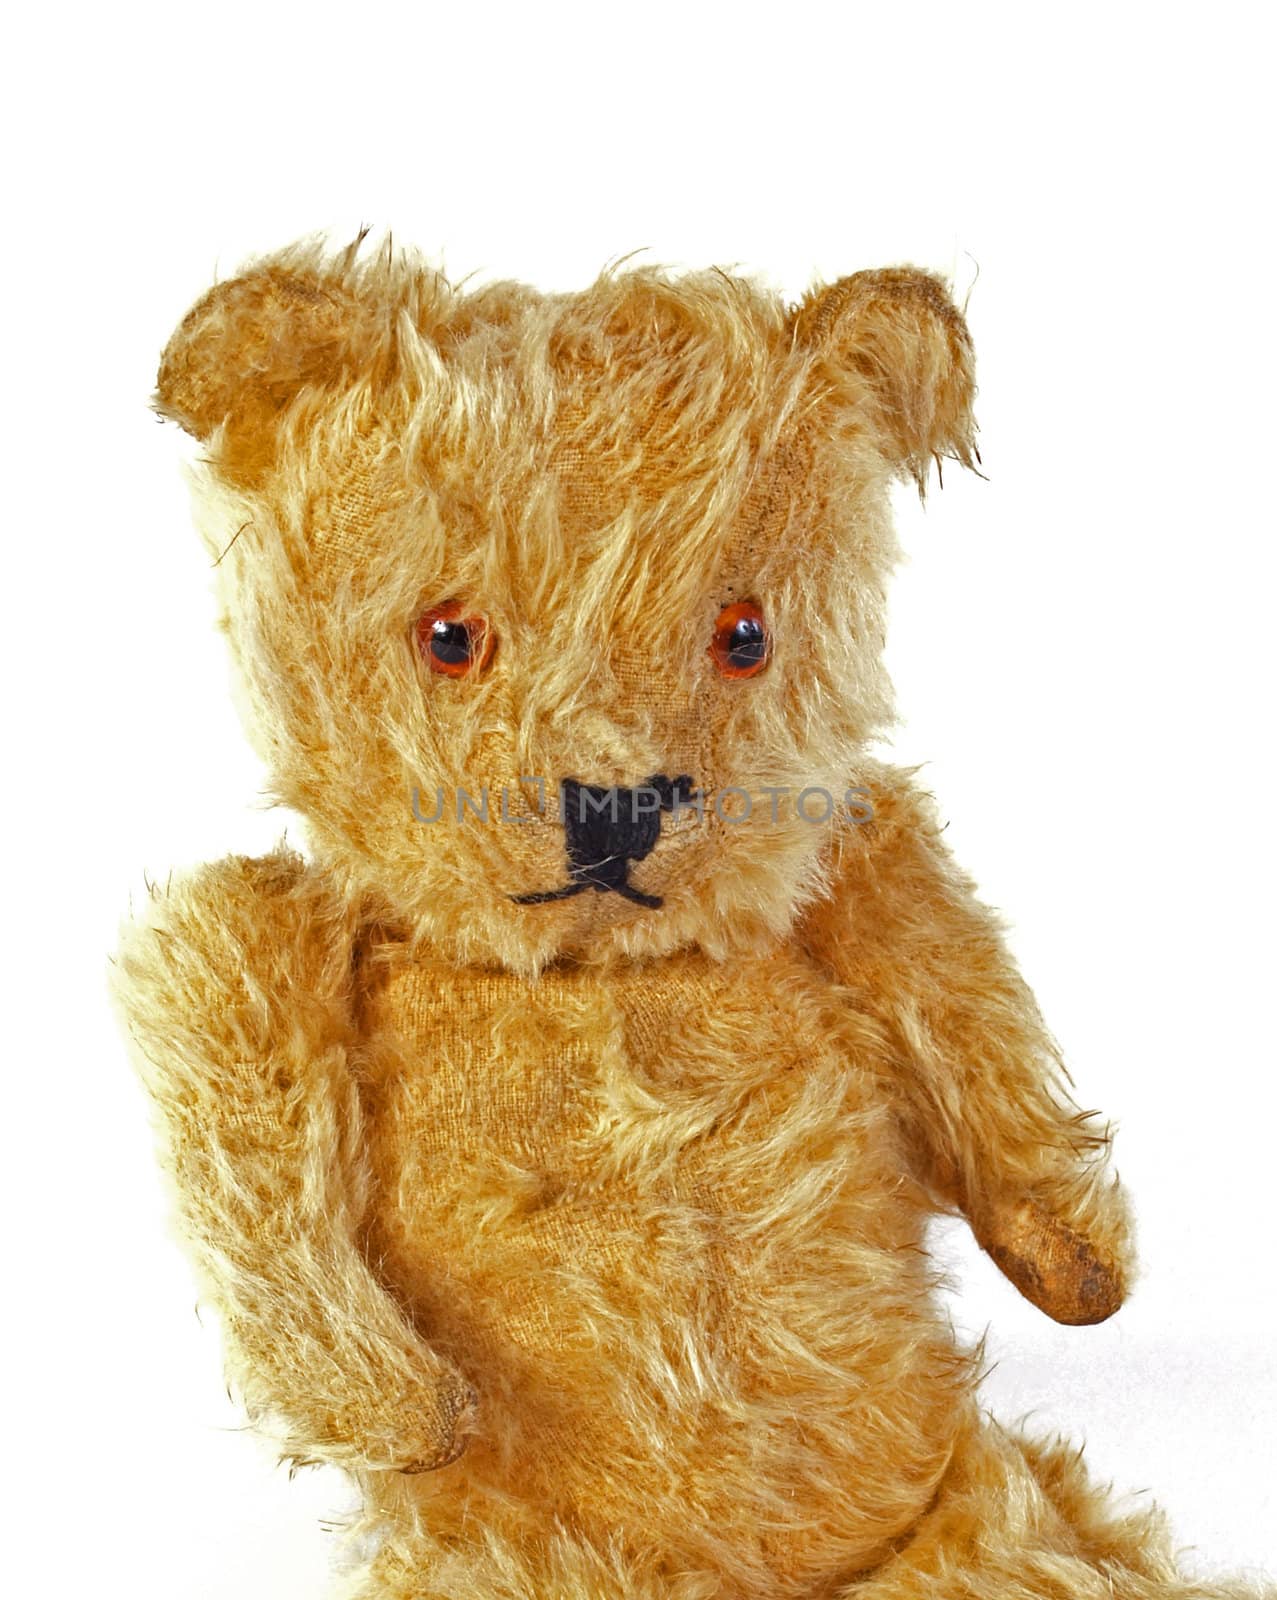 Close up of a Teddy Bear on a white background.